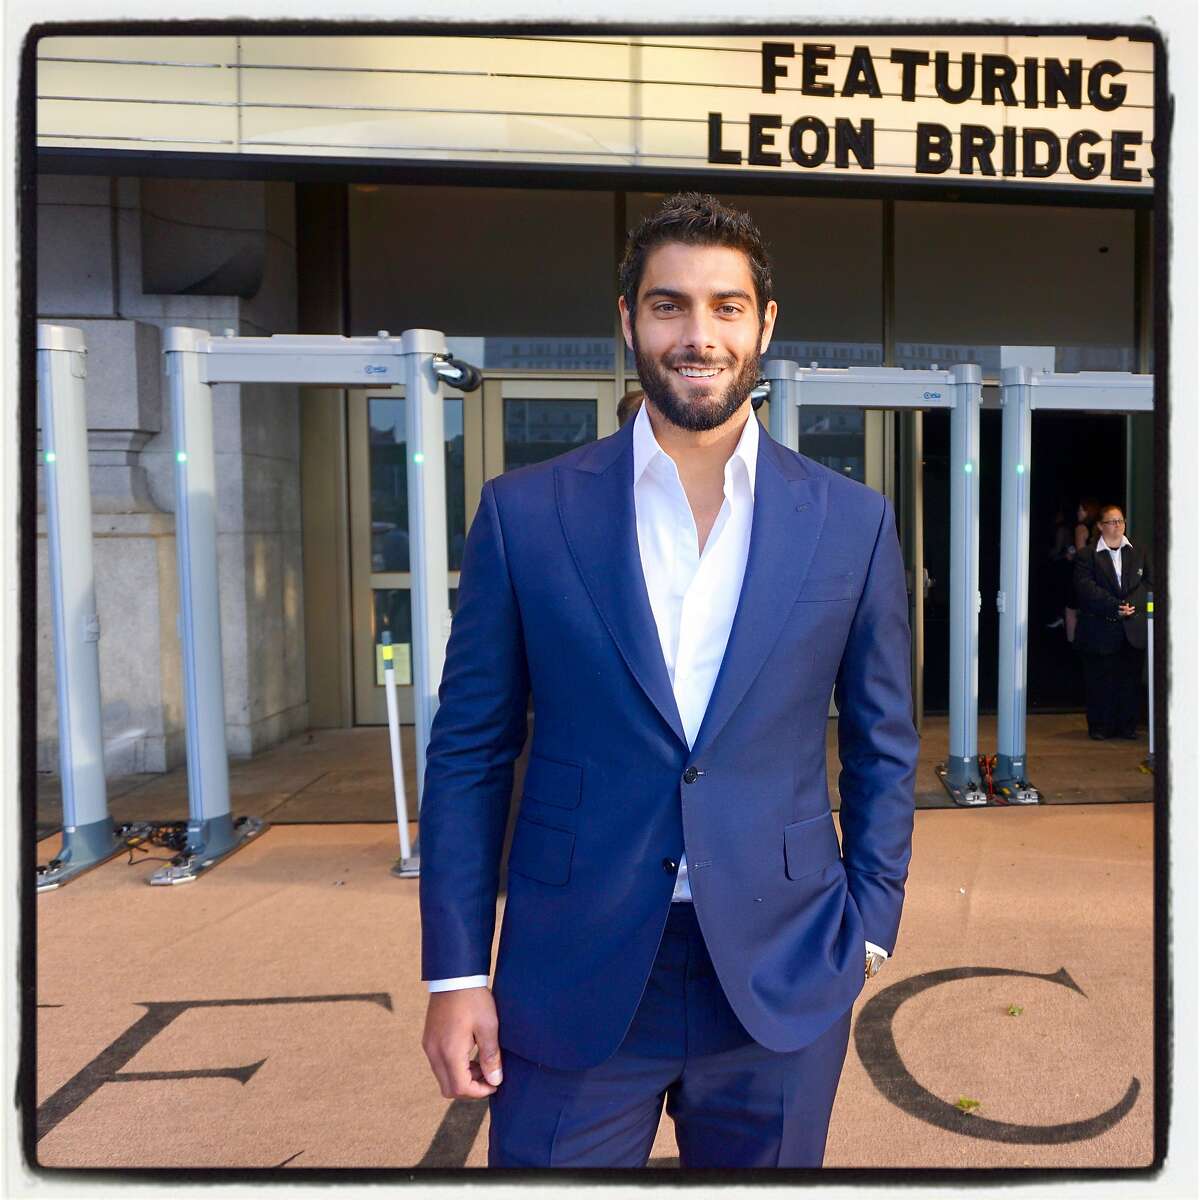 49ers quarterback Jimmy Garoppolo at the Tipping Point benefit. May 3, 2018.